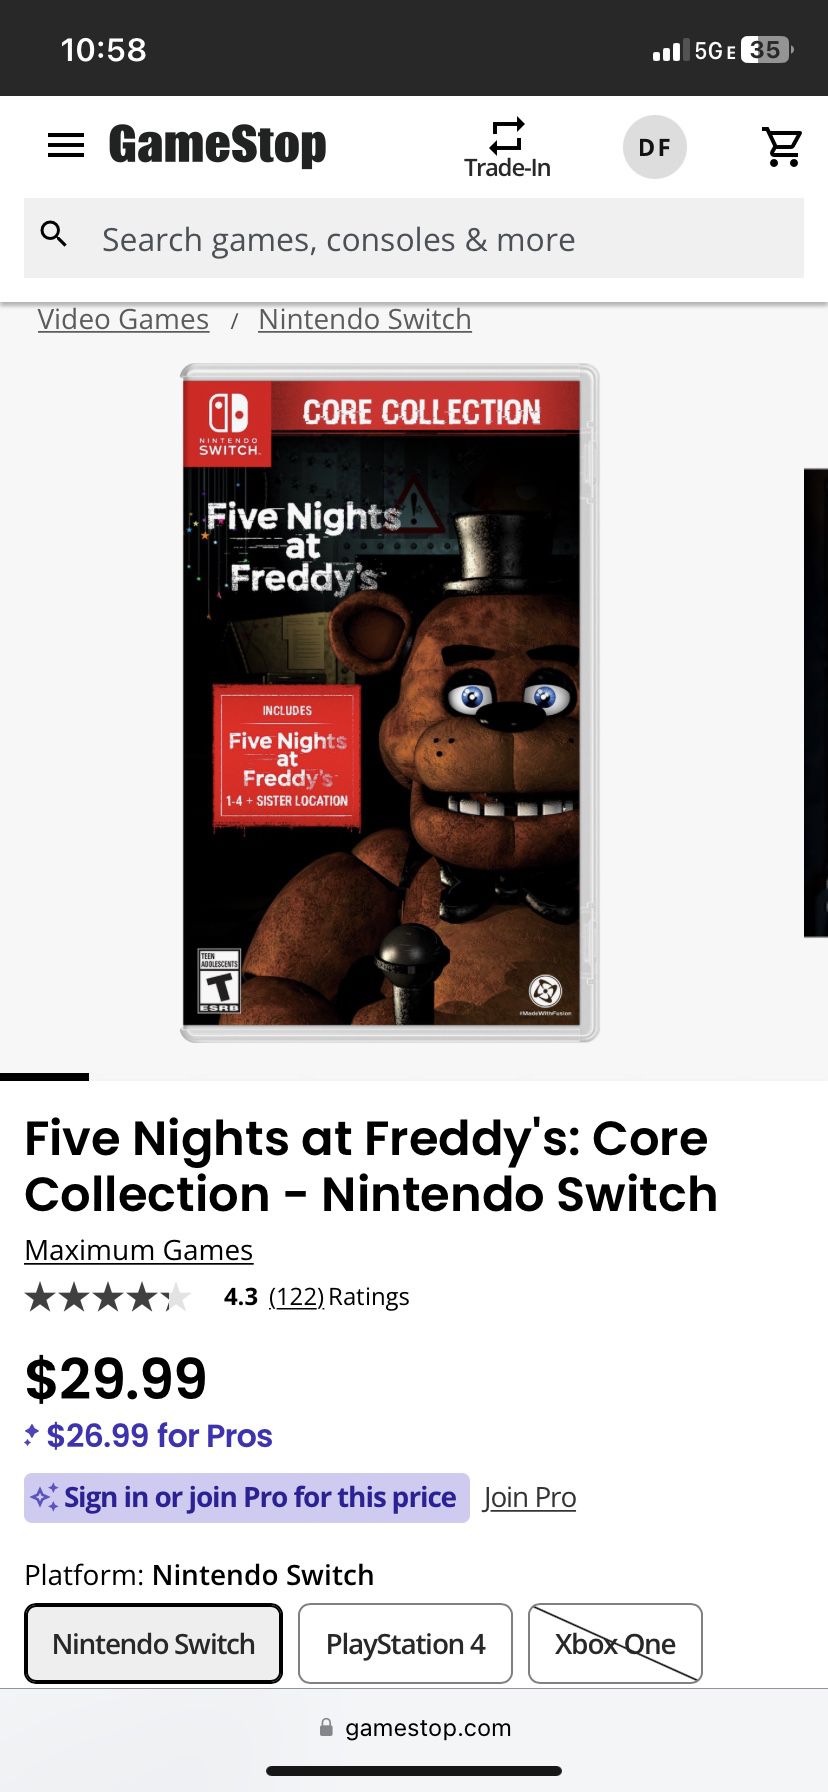  Five Nights At Freddy's: Core Collection (Nintendo Switch) :  Video Games